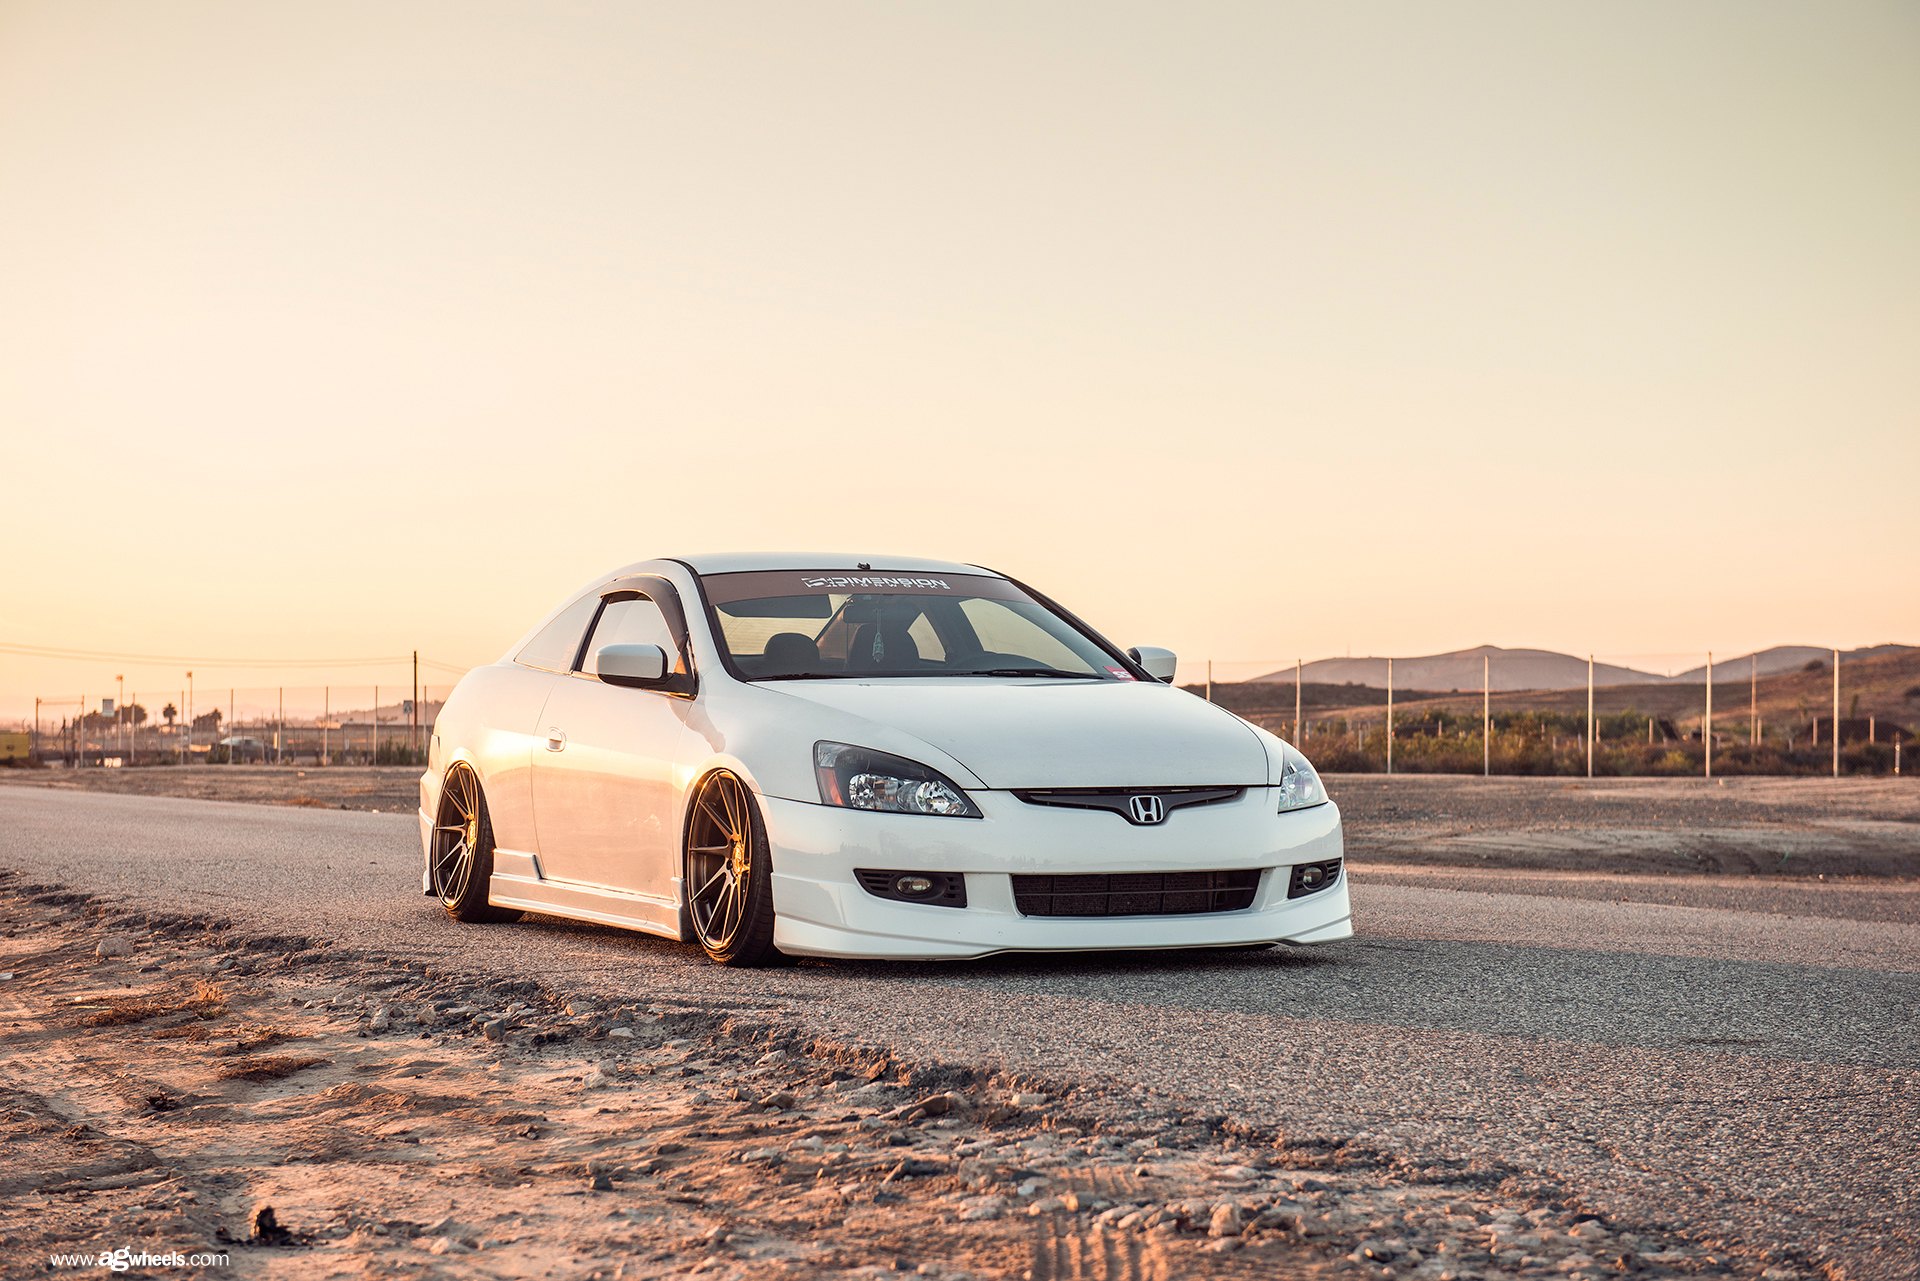 White Stanced Honda Accord with Custom Front Bumper - Photo by Avant Garde Wheels